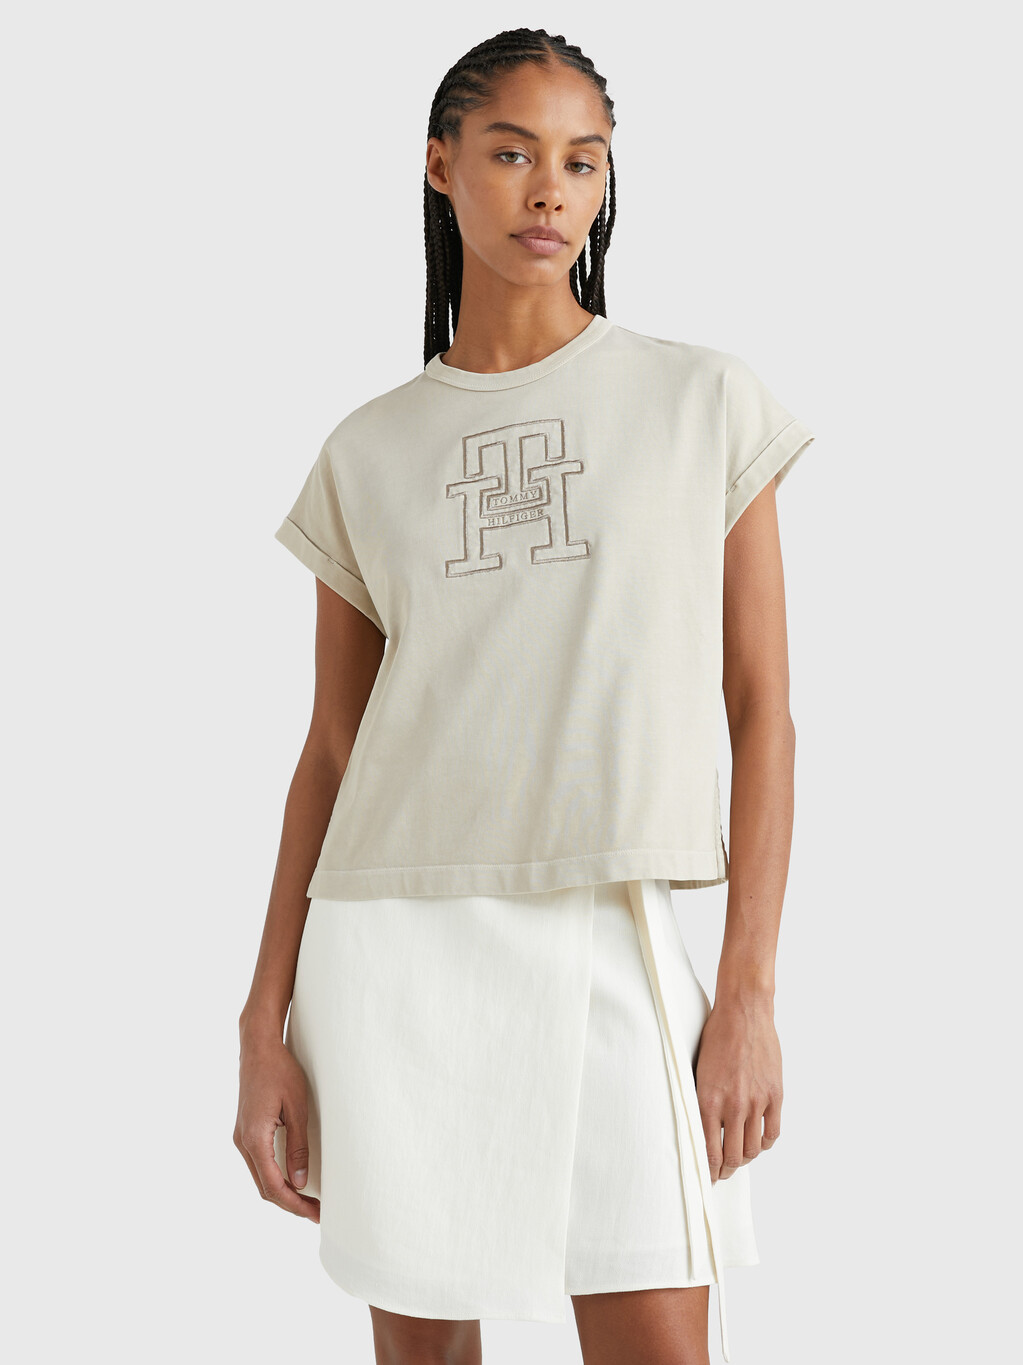 Embroidery Relaxed Fit T-Shirt, Light Sandalwood, hi-res